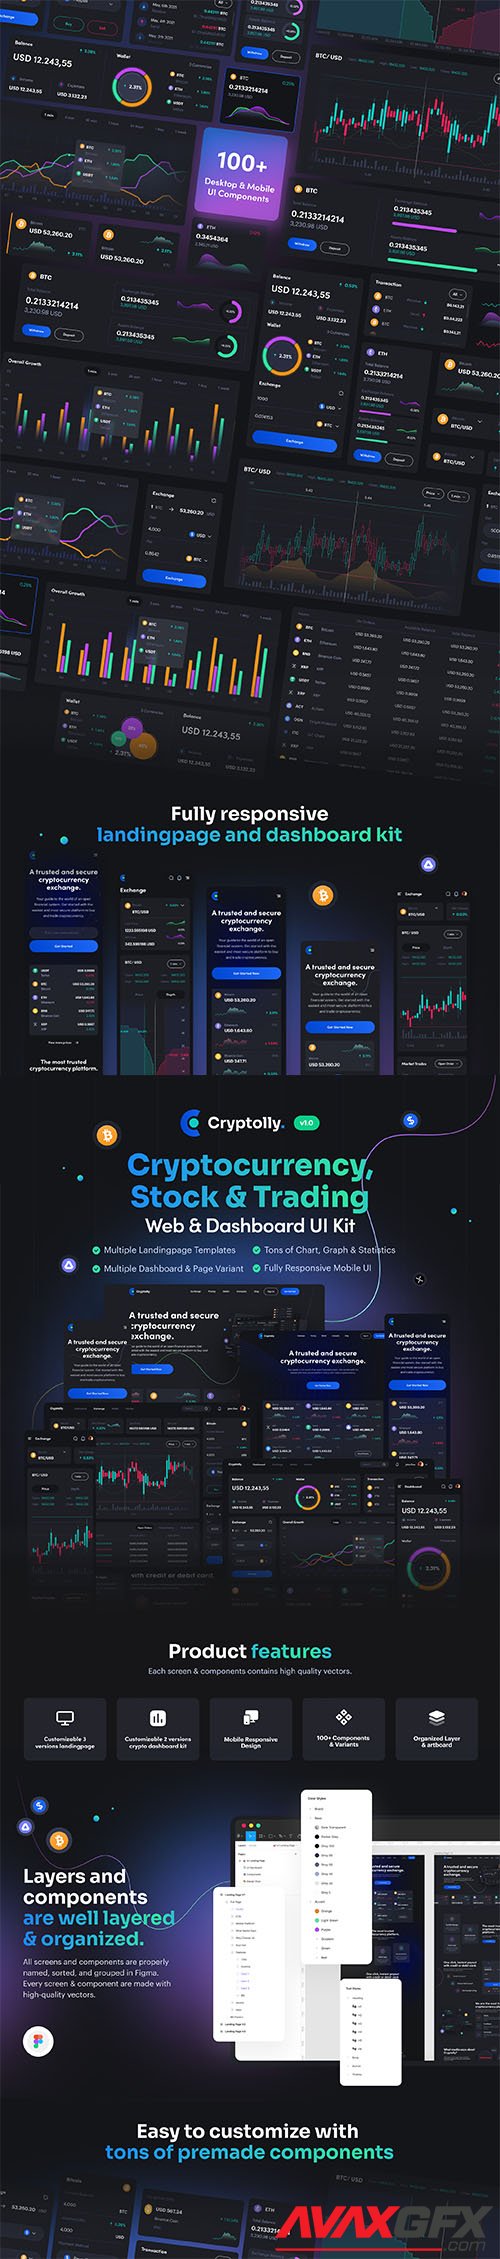 Cryptolly - Cryptocurrency Web & Dashboard UI Kit